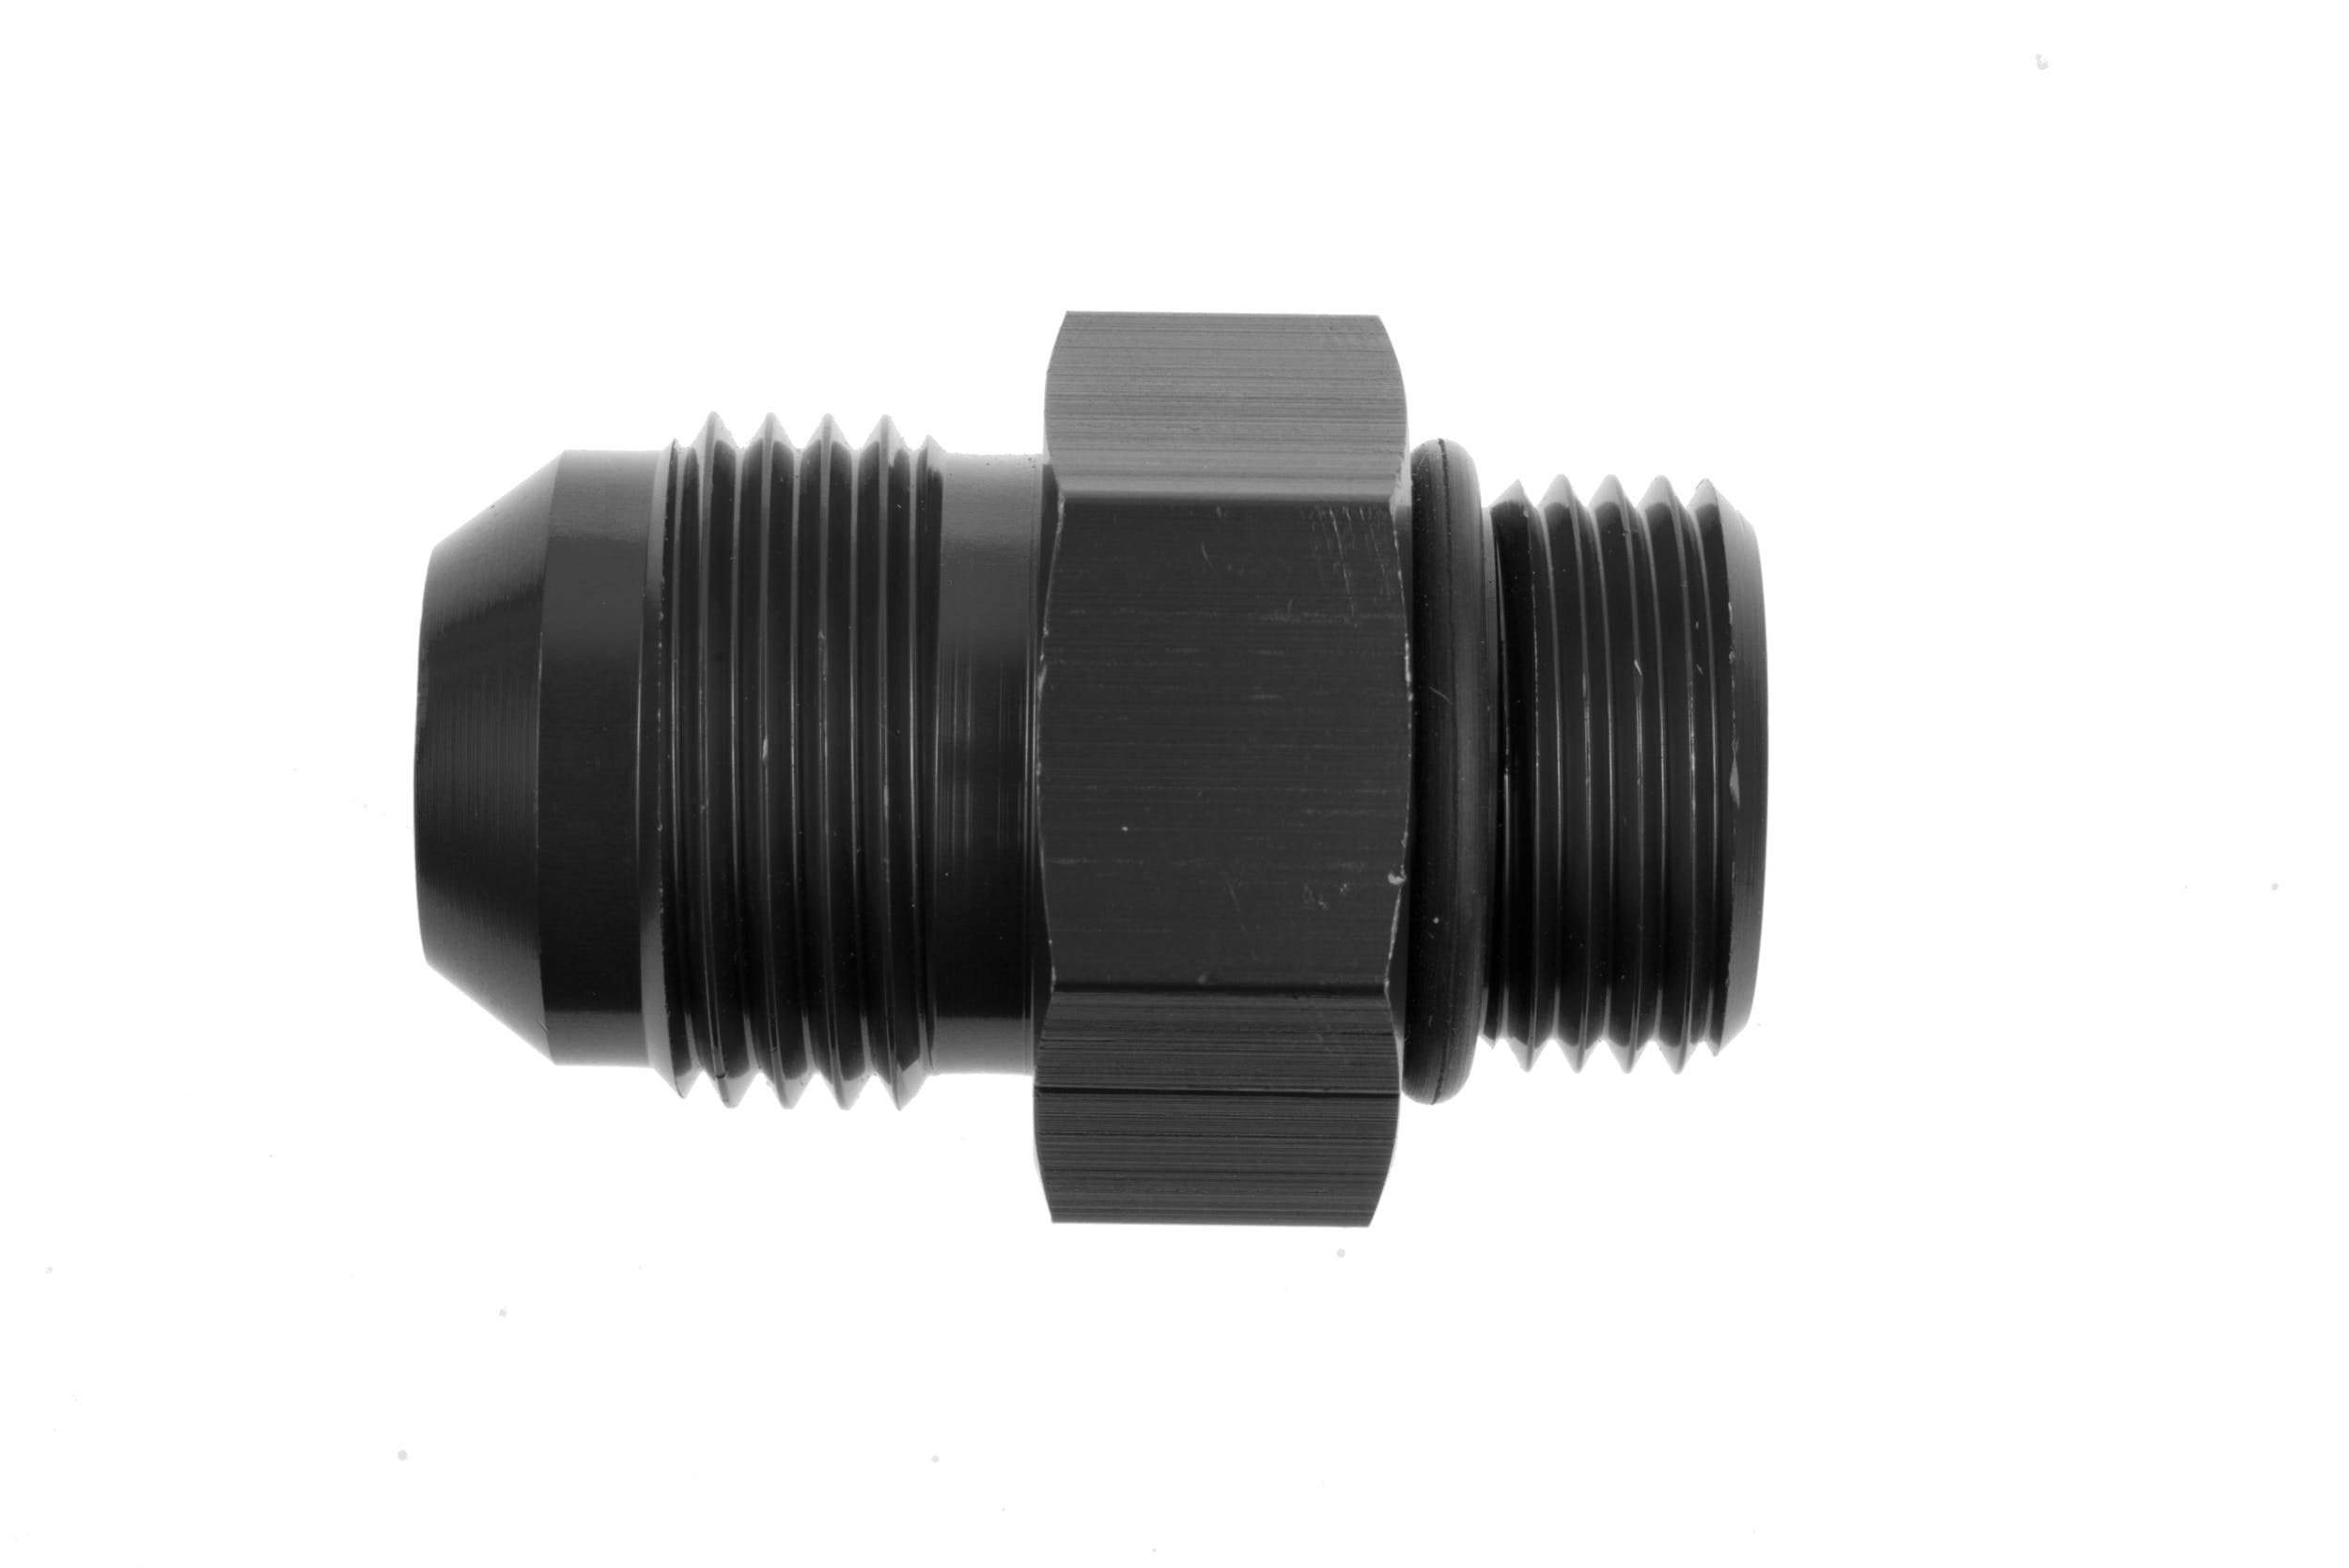 Redhorse Performance 920-08-08-2 -08 Male to -08 o-ring port adapter (high flow radius ORB) - black